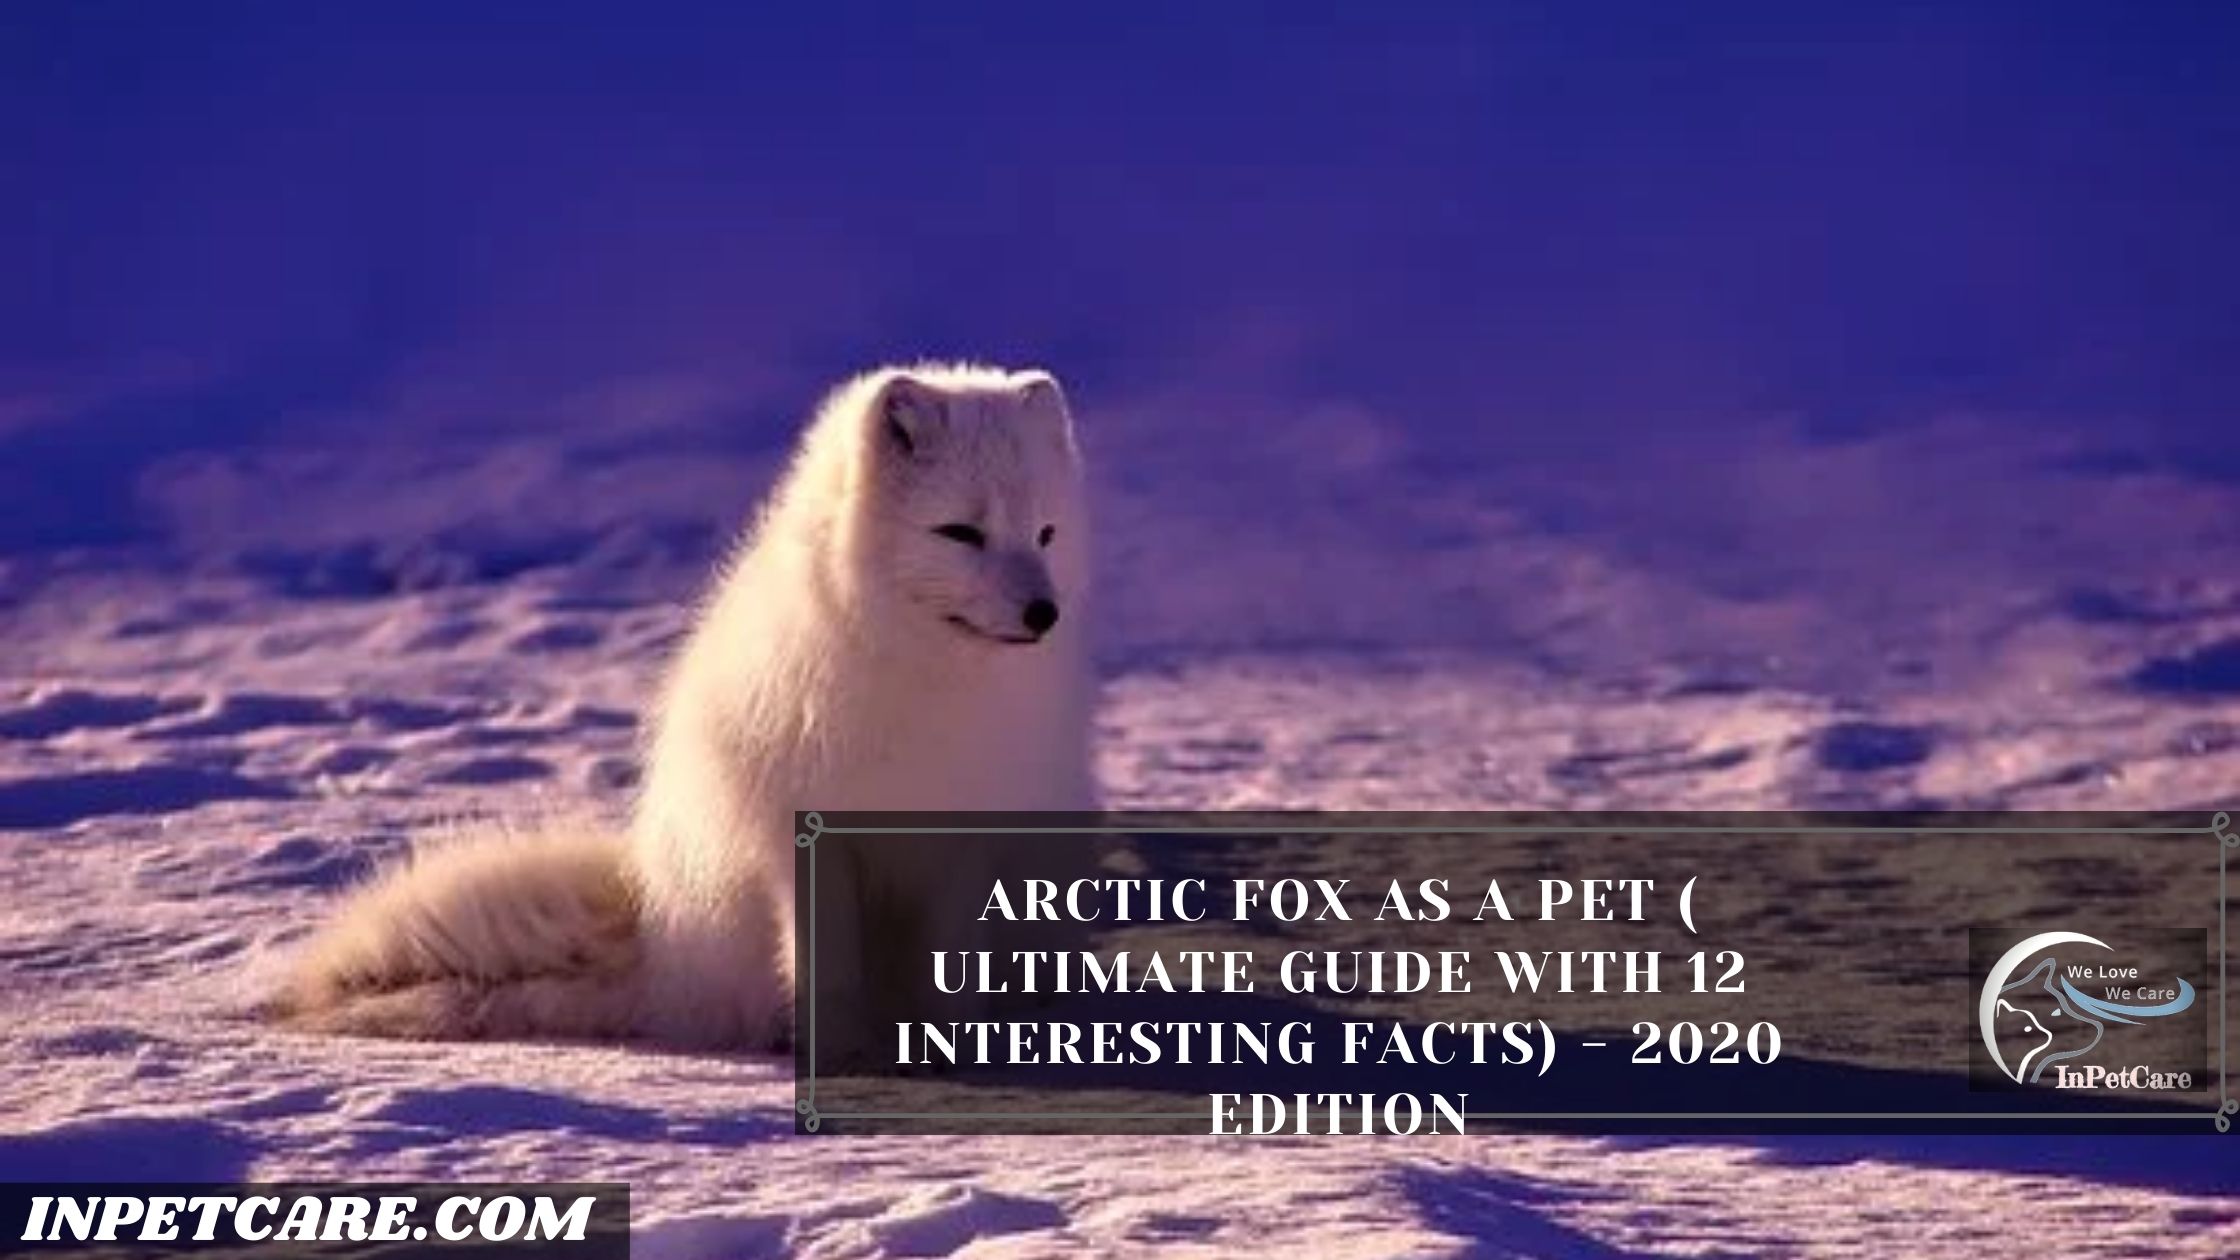 Arctic Fox as a Pet ( Ultimate Guide with 12 Interesting Facts) - 2020 Edition